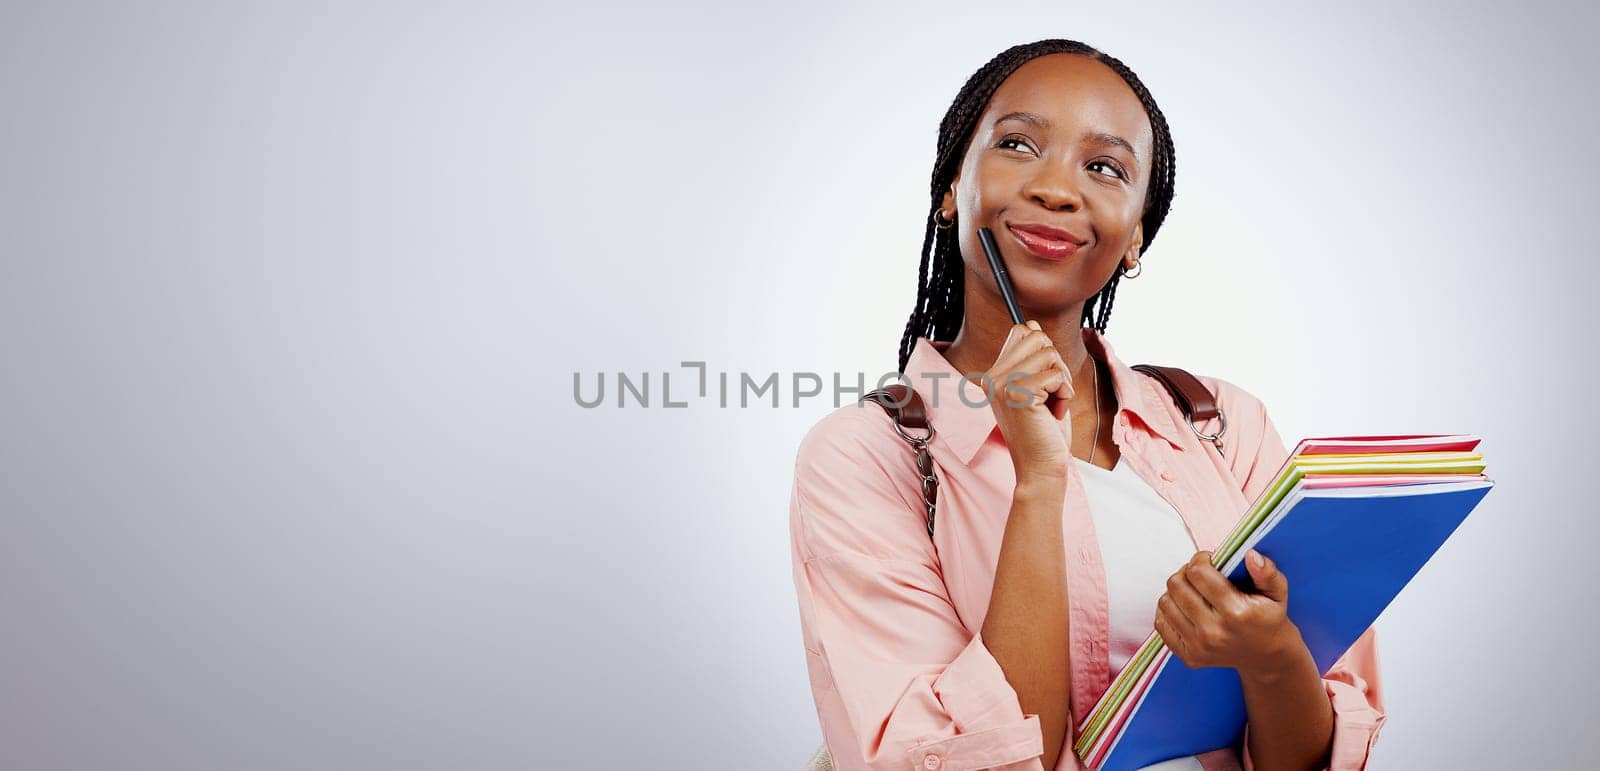 Student, woman thinking and education mockup or banner for learning, university or study choice or opportunity in studio. African person with books, ideas and vision for future on a white background.